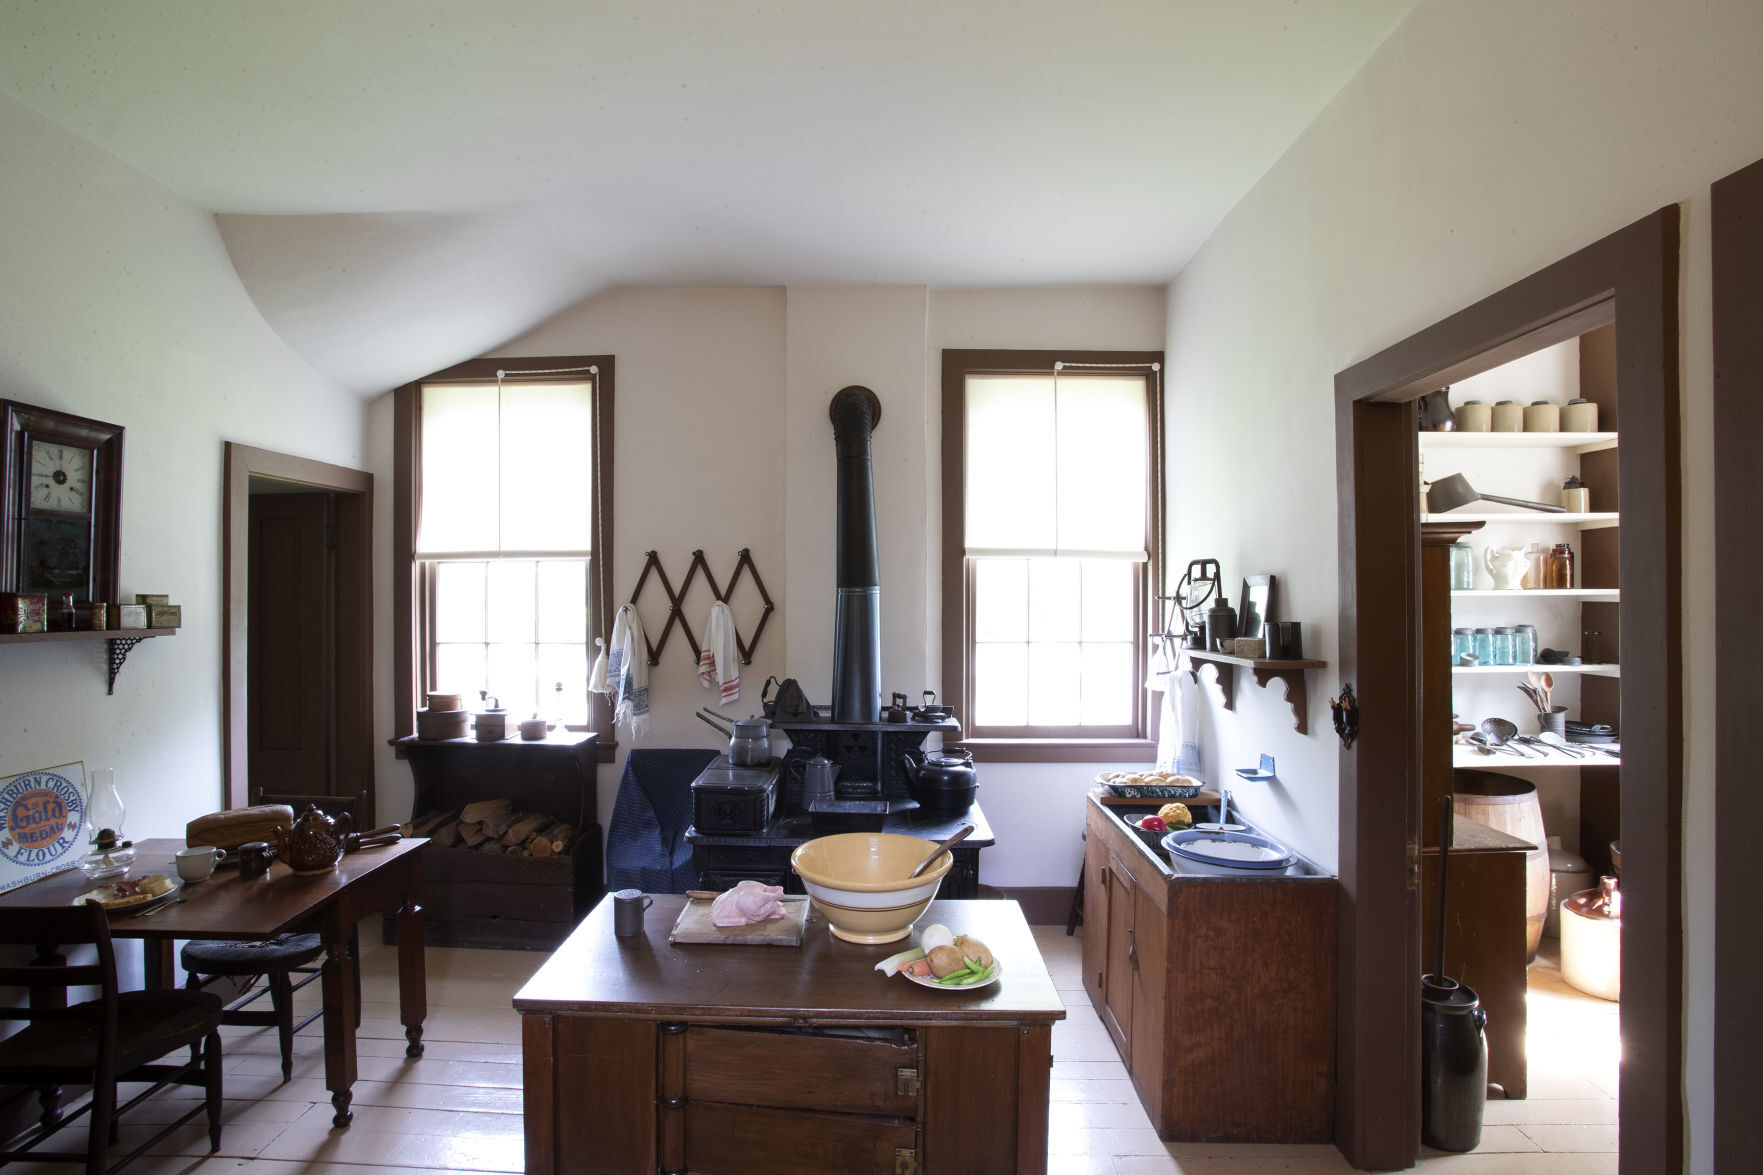 The kitchen inside the Washburne House in Galena, Ill., on Wedneday, June 30, 2021.    PHOTO CREDIT: Stephen Gassman